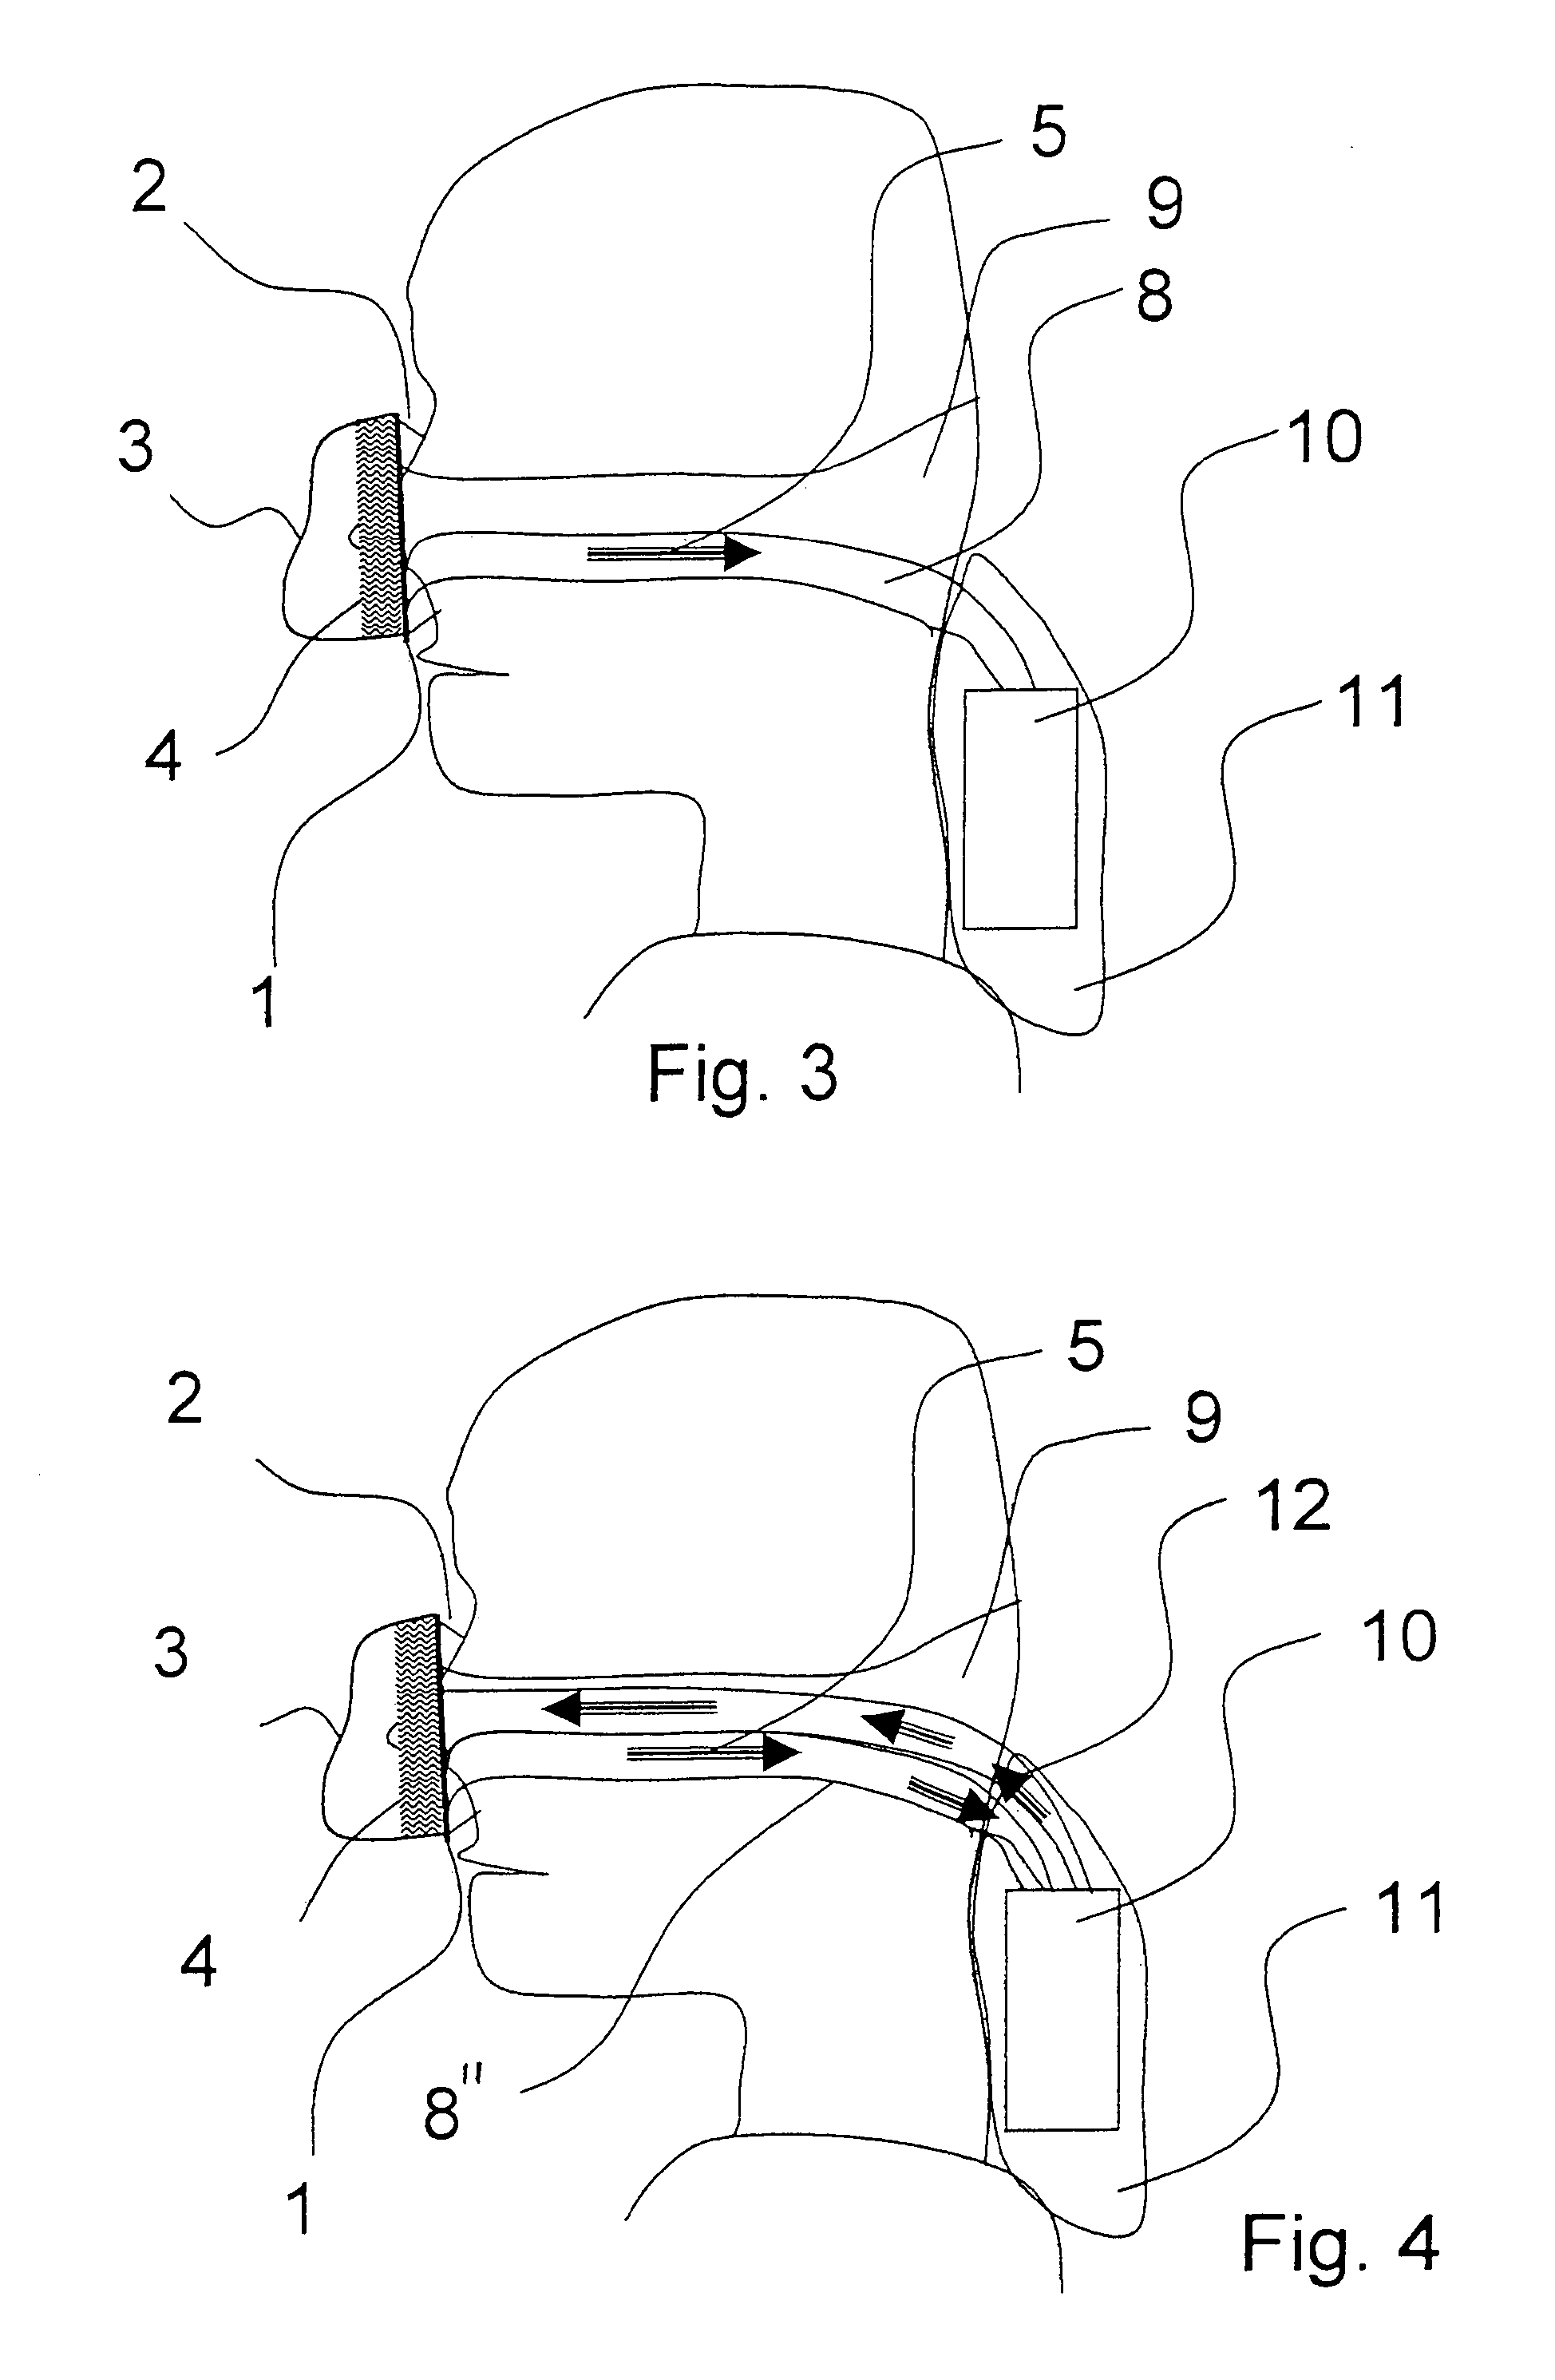 Breathing mask with integrated suction area